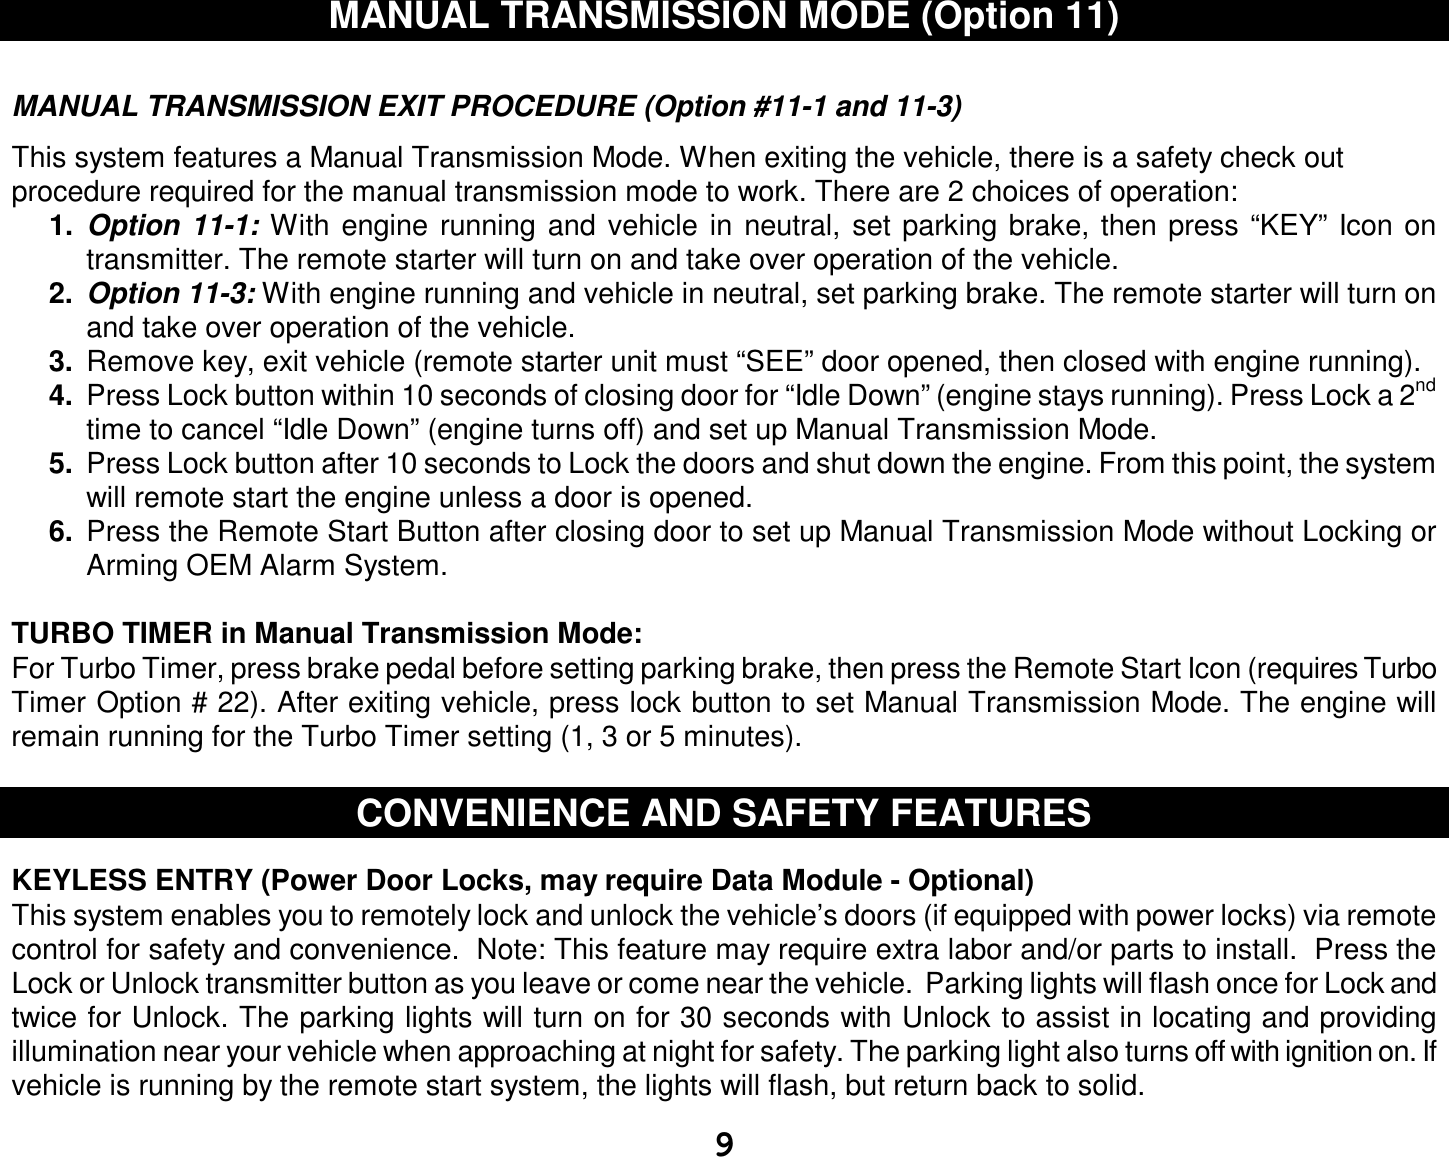  9 MANUAL TRANSMISSION MODE (Option 11)   MANUAL TRANSMISSION EXIT PROCEDURE (Option #11-1 and 11-3)  This system features a Manual Transmission Mode. When exiting the vehicle, there is a safety check out procedure required for the manual transmission mode to work. There are 2 choices of operation:  1.  Option 11-1: With engine running and vehicle in neutral, set parking brake, then press “KEY” Icon on transmitter. The remote starter will turn on and take over operation of the vehicle. 2.  Option 11-3: With engine running and vehicle in neutral, set parking brake. The remote starter will turn on and take over operation of the vehicle. 3.  Remove key, exit vehicle (remote starter unit must “SEE” door opened, then closed with engine running). 4.  Press Lock button within 10 seconds of closing door for “Idle Down” (engine stays running). Press Lock a 2nd time to cancel “Idle Down” (engine turns off) and set up Manual Transmission Mode. 5.  Press Lock button after 10 seconds to Lock the doors and shut down the engine. From this point, the system will remote start the engine unless a door is opened. 6.  Press the Remote Start Button after closing door to set up Manual Transmission Mode without Locking or Arming OEM Alarm System.   TURBO TIMER in Manual Transmission Mode: For Turbo Timer, press brake pedal before setting parking brake, then press the Remote Start Icon (requires Turbo Timer Option # 22). After exiting vehicle, press lock button to set Manual Transmission Mode. The engine will remain running for the Turbo Timer setting (1, 3 or 5 minutes).   CONVENIENCE AND SAFETY FEATURES   KEYLESS ENTRY (Power Door Locks, may require Data Module - Optional)  This system enables you to remotely lock and unlock the vehicle’s doors (if equipped with power locks) via remote control for safety and convenience.  Note: This feature may require extra labor and/or parts to install.  Press the Lock or Unlock transmitter button as you leave or come near the vehicle.  Parking lights will flash once for Lock and twice for Unlock. The parking lights will turn on for 30 seconds with Unlock to assist in locating and providing illumination near your vehicle when approaching at night for safety. The parking light also turns off with ignition on. If vehicle is running by the remote start system, the lights will flash, but return back to solid. 